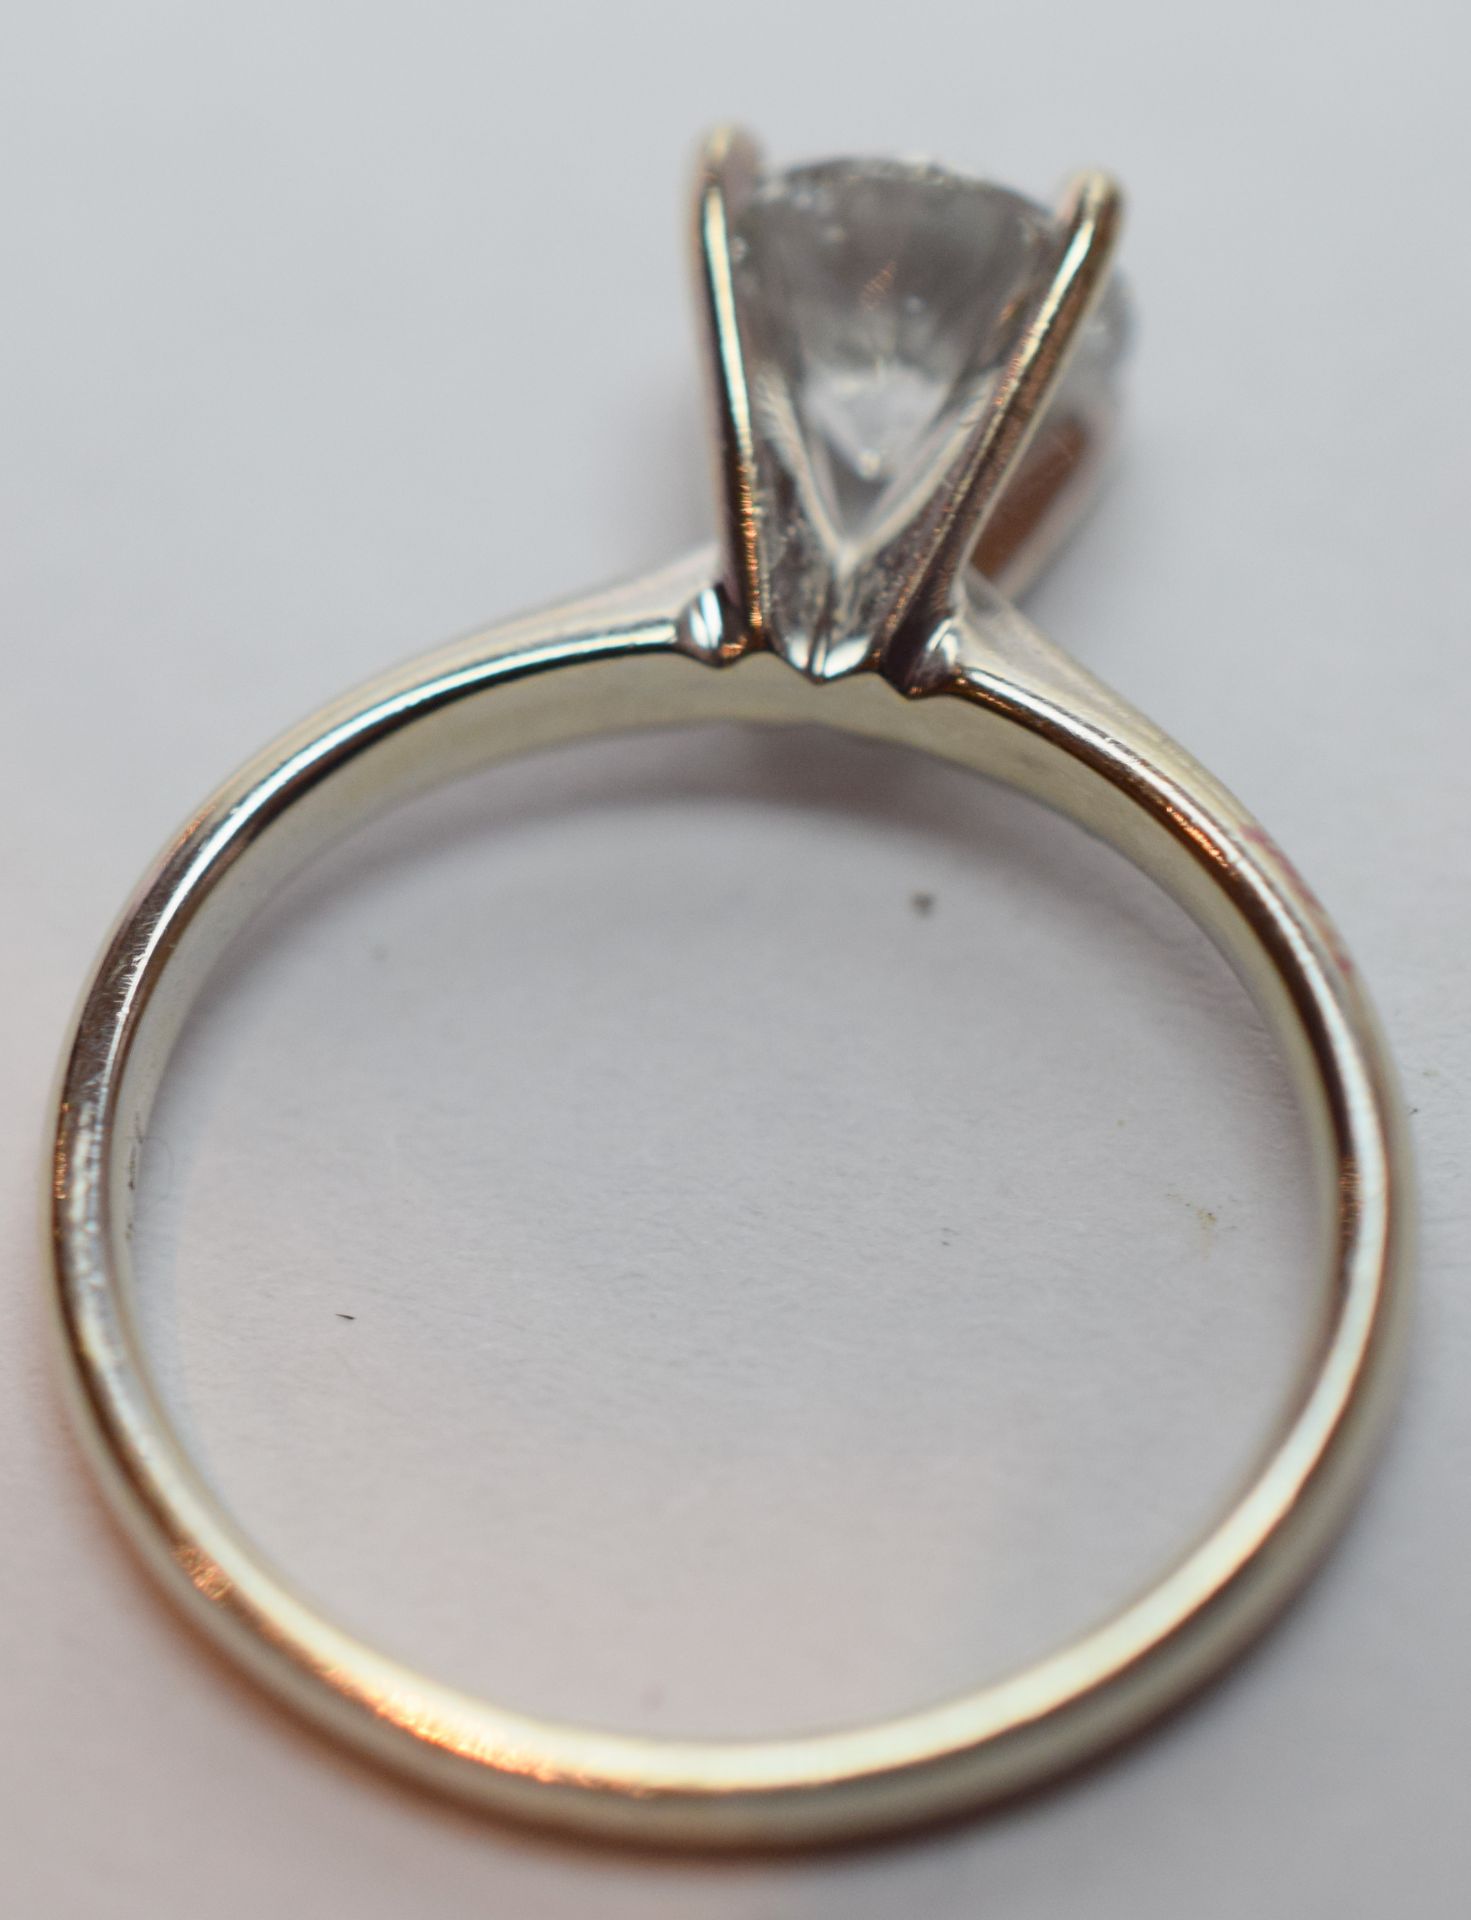 Diamond Solitaire Ring 1.12ct on 14kt White Gold RESERVE LOWERED - Image 3 of 6